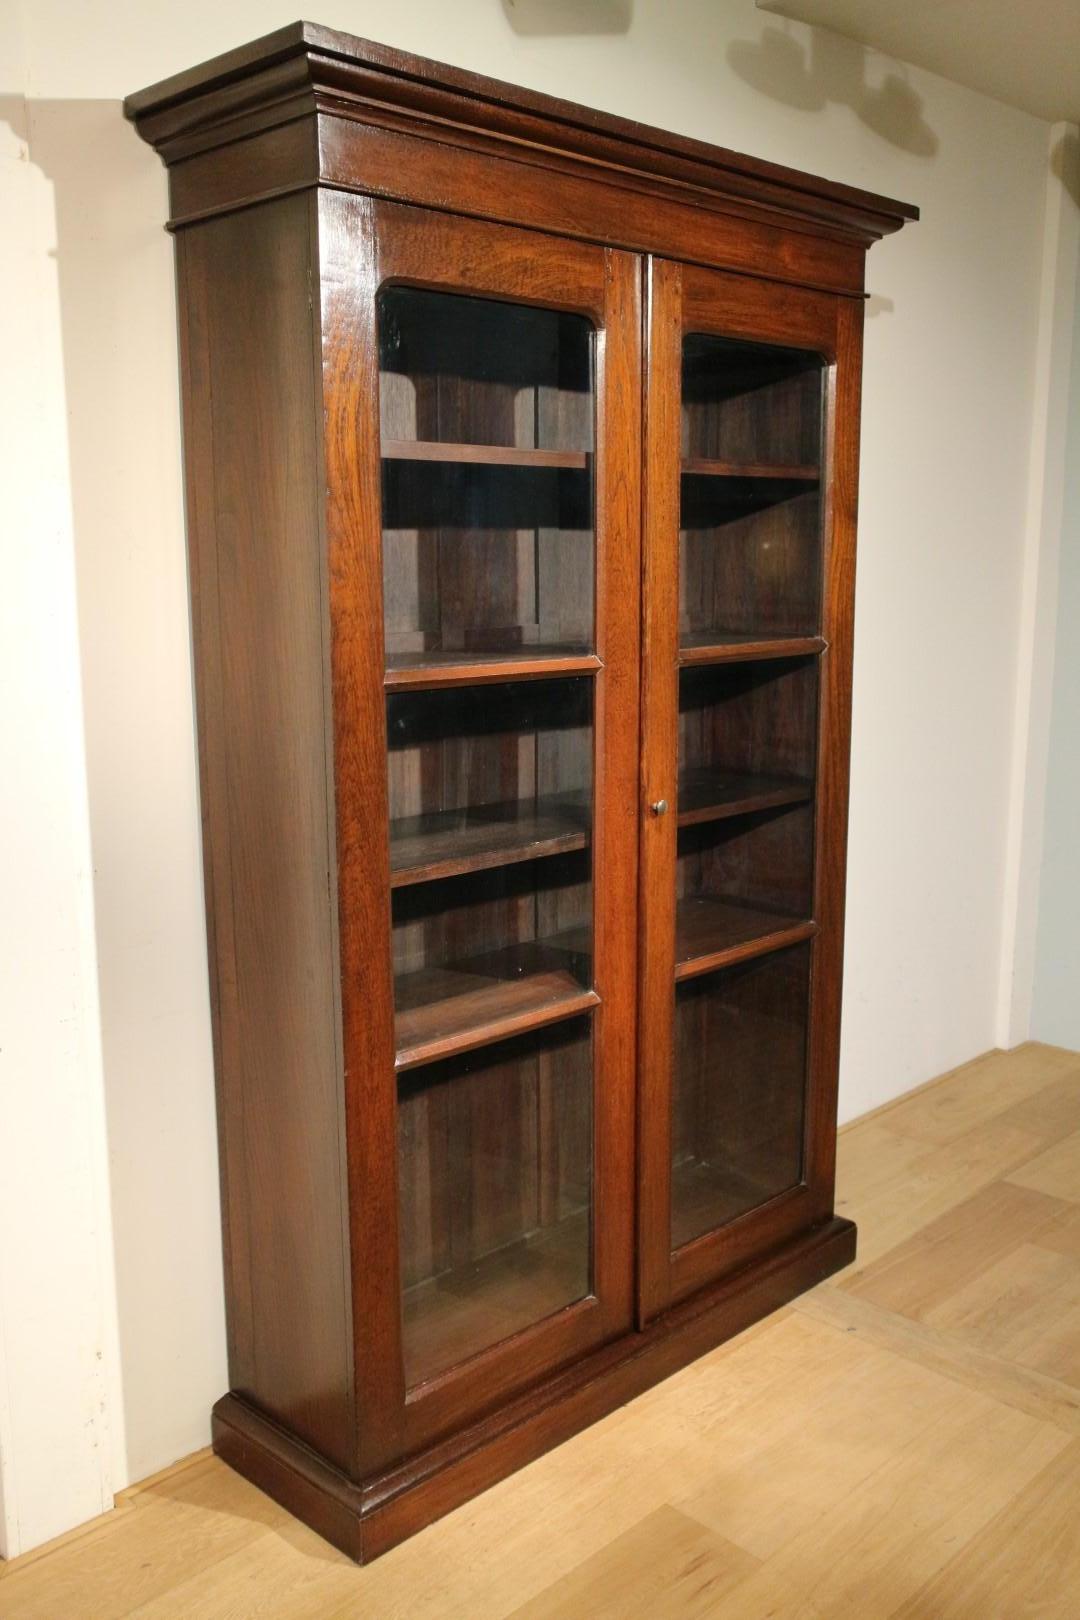 Beautiful antique colonial teak 2 door bookcase in very good condition and top quality.
The cabinet has 4 shelves. Mostly the original glass.
Origin: Colonial India
Period: Approx. 1890
Size:123cm x 35cm x H.206cm.